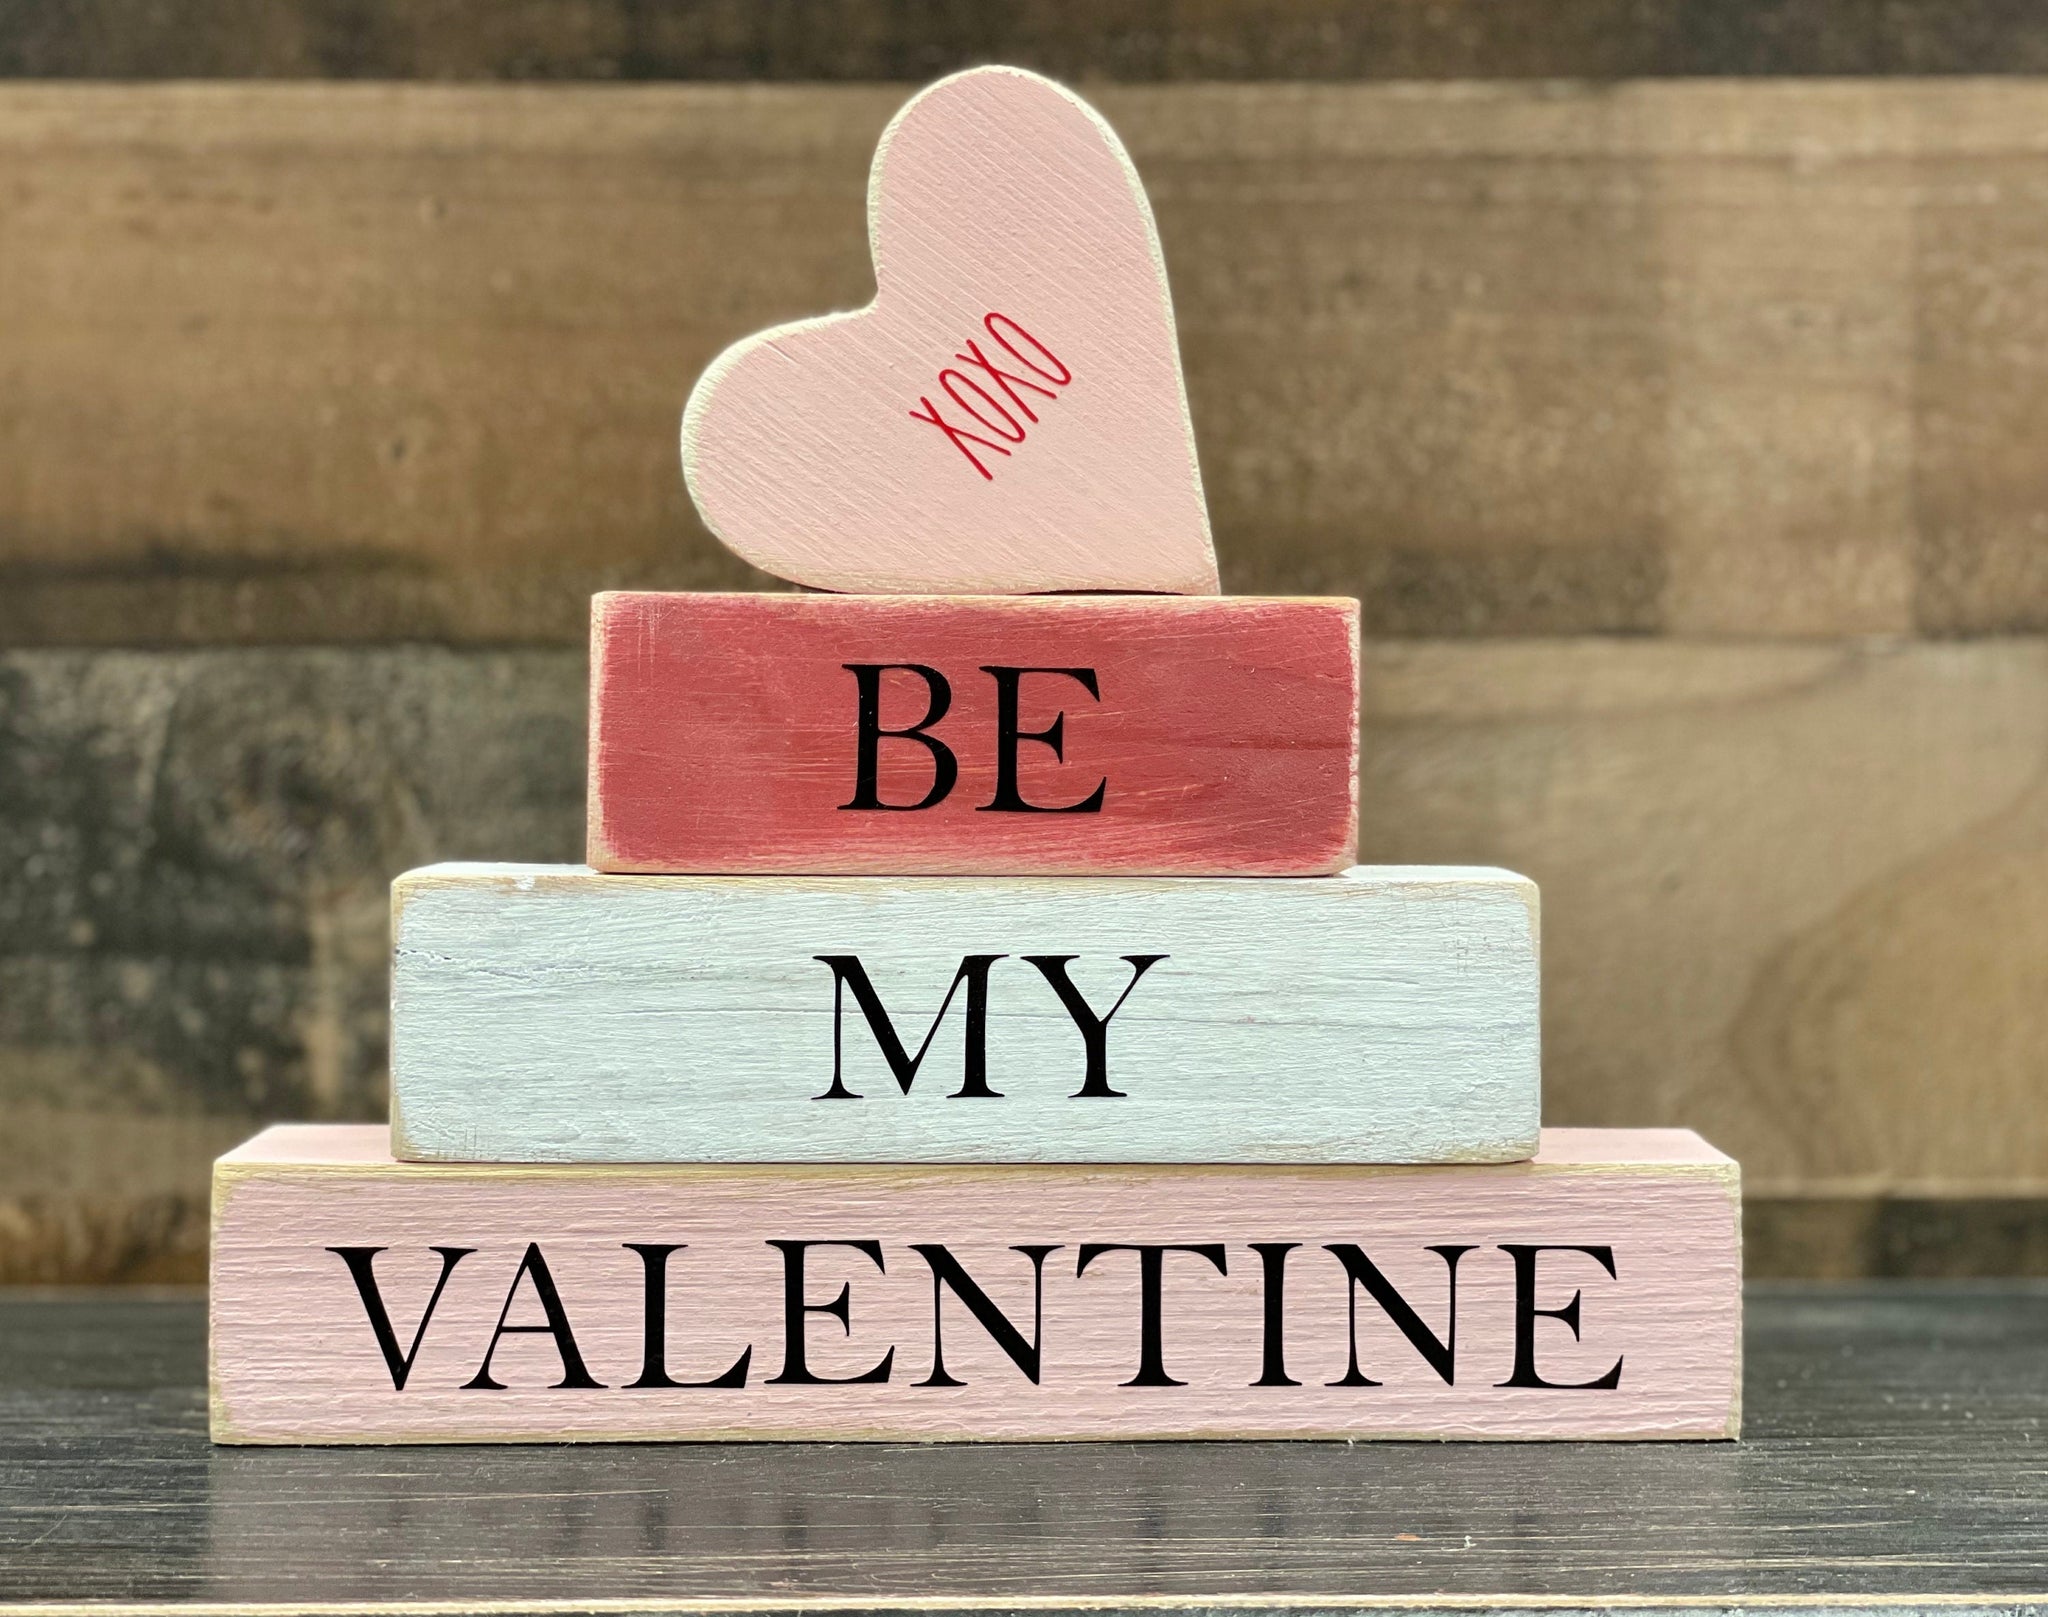 Valentines day decor, Tiered tray, Wooden blocks, Be my Valentine, Wood conversation heart, Gift for her, Rustic